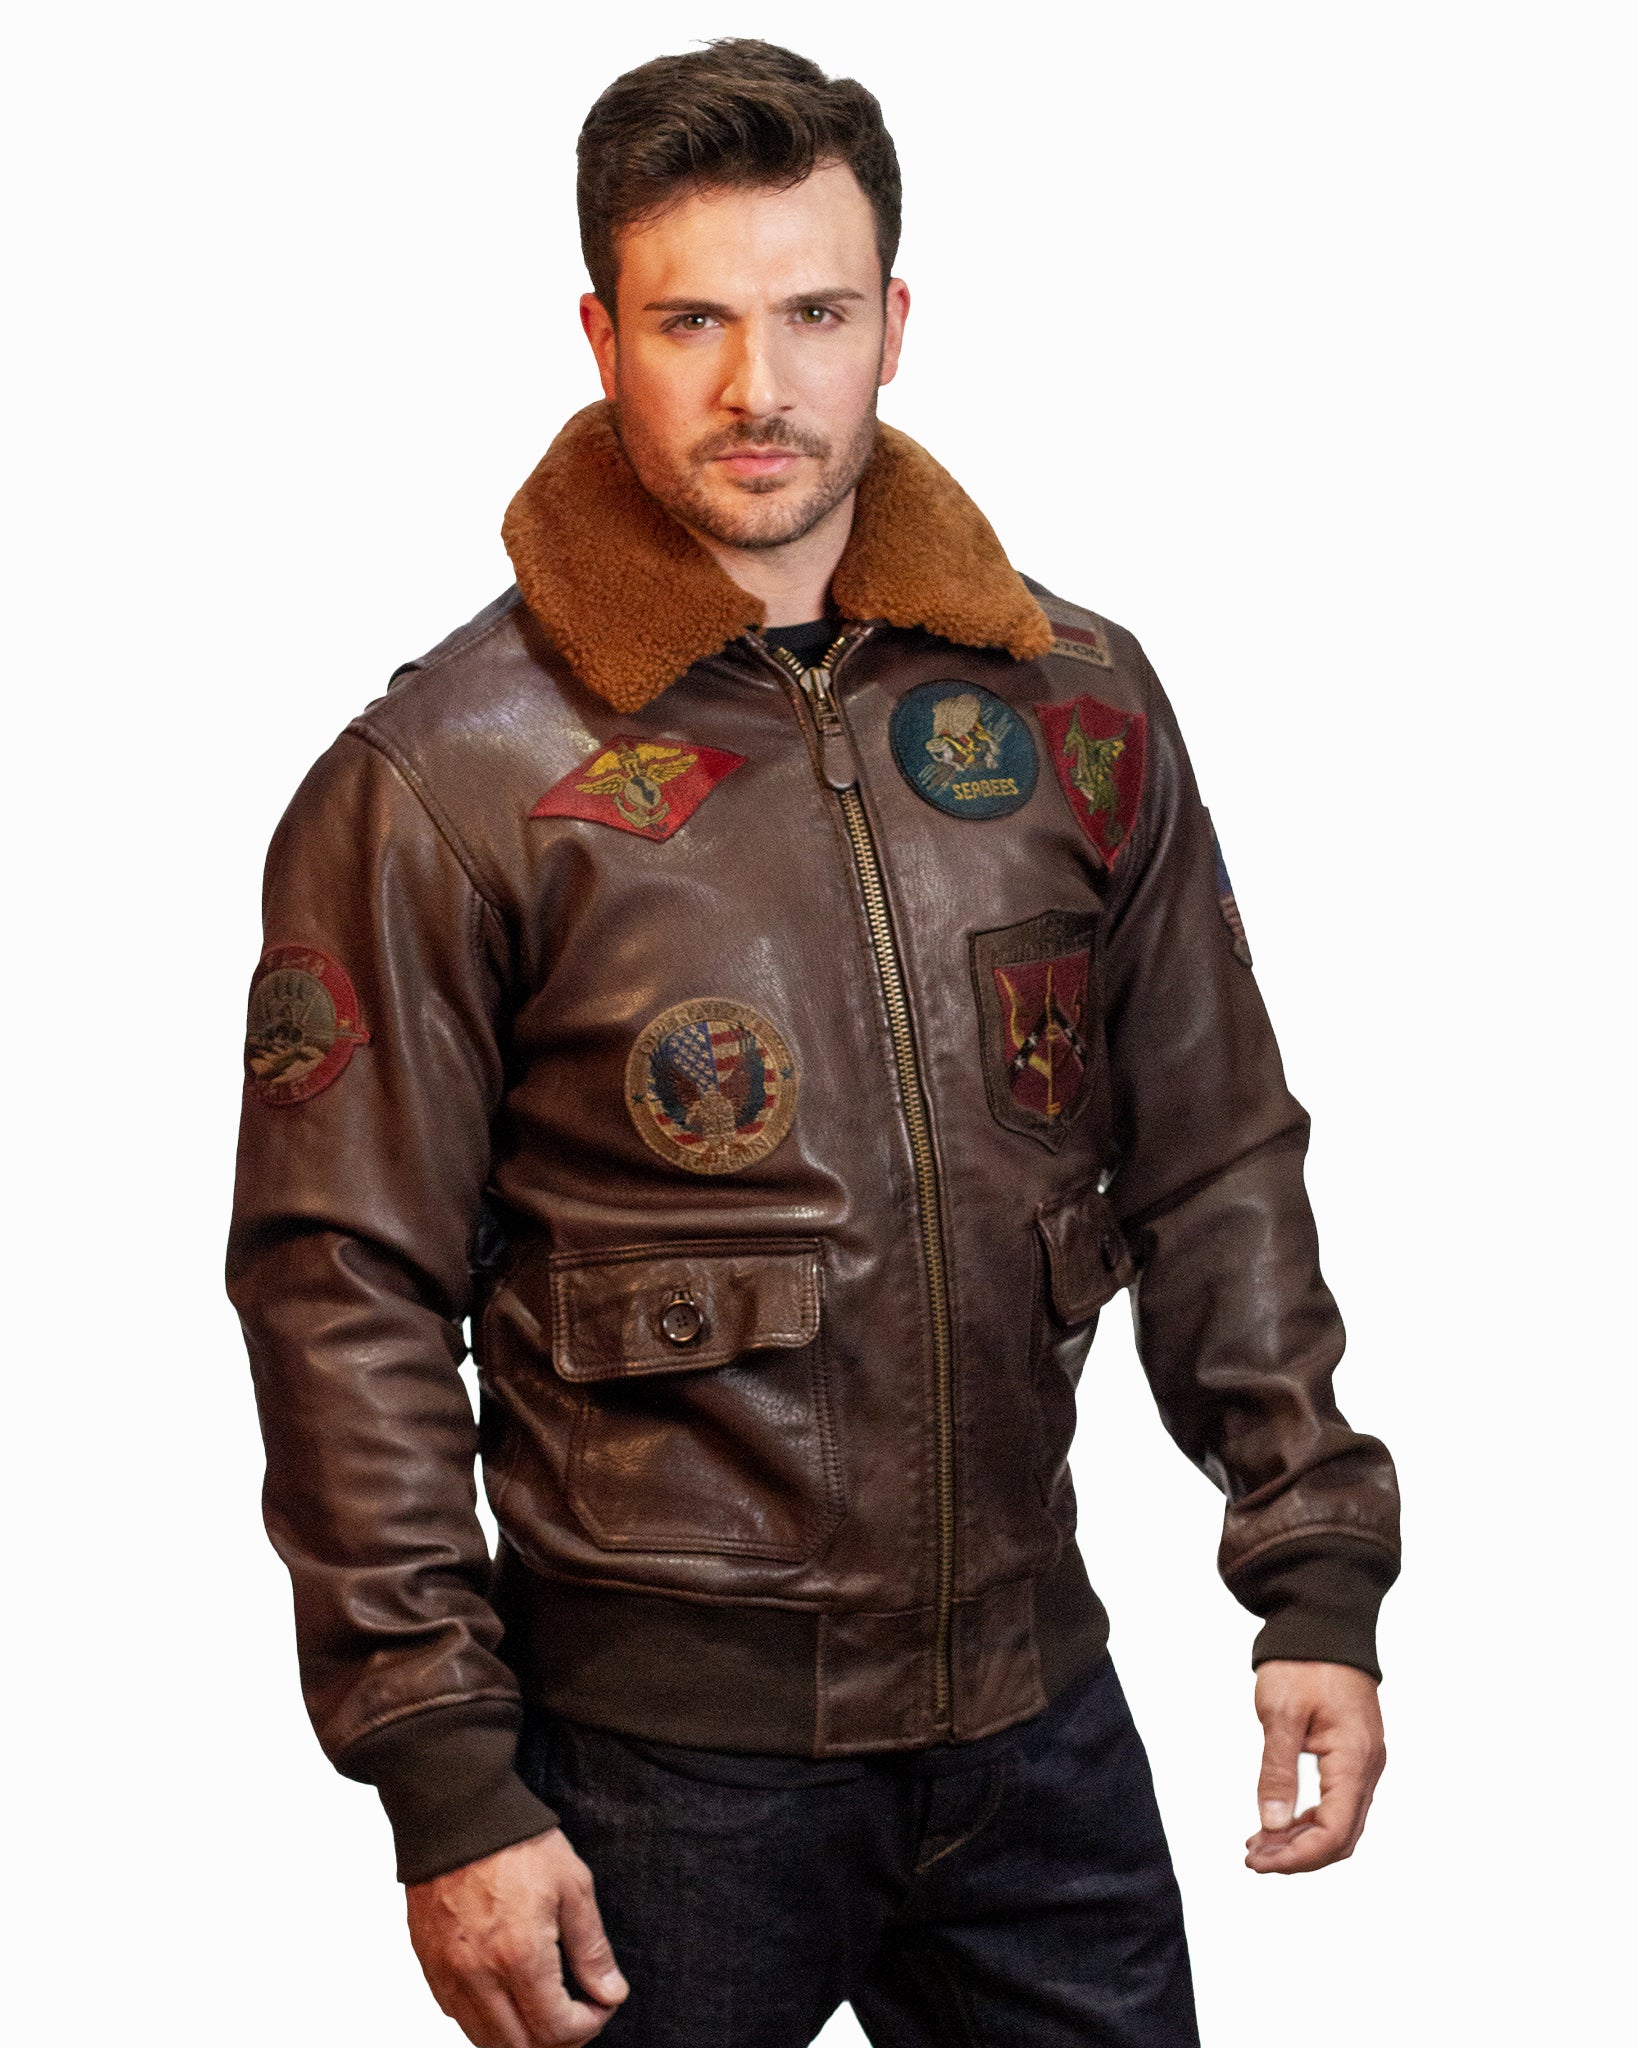 Men's Leather Jackets | The Top Gun® Official Store | Men's Leather ...